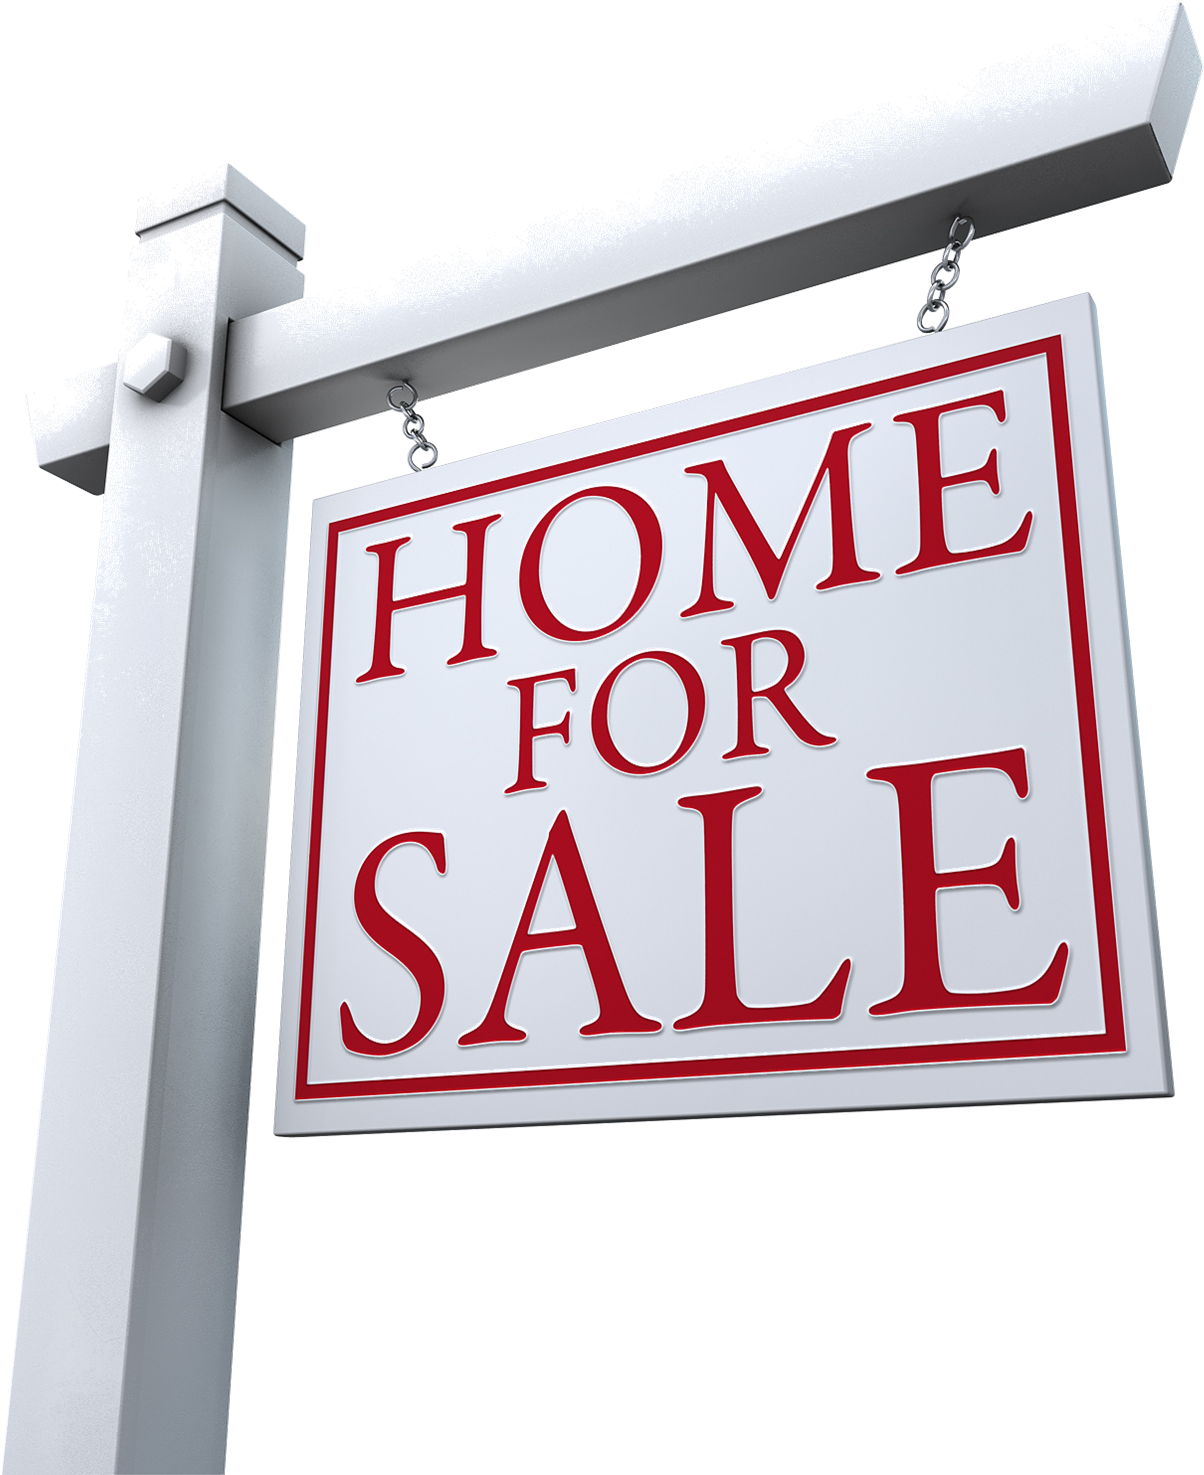 Homes For Sale Sign (1326x1491)